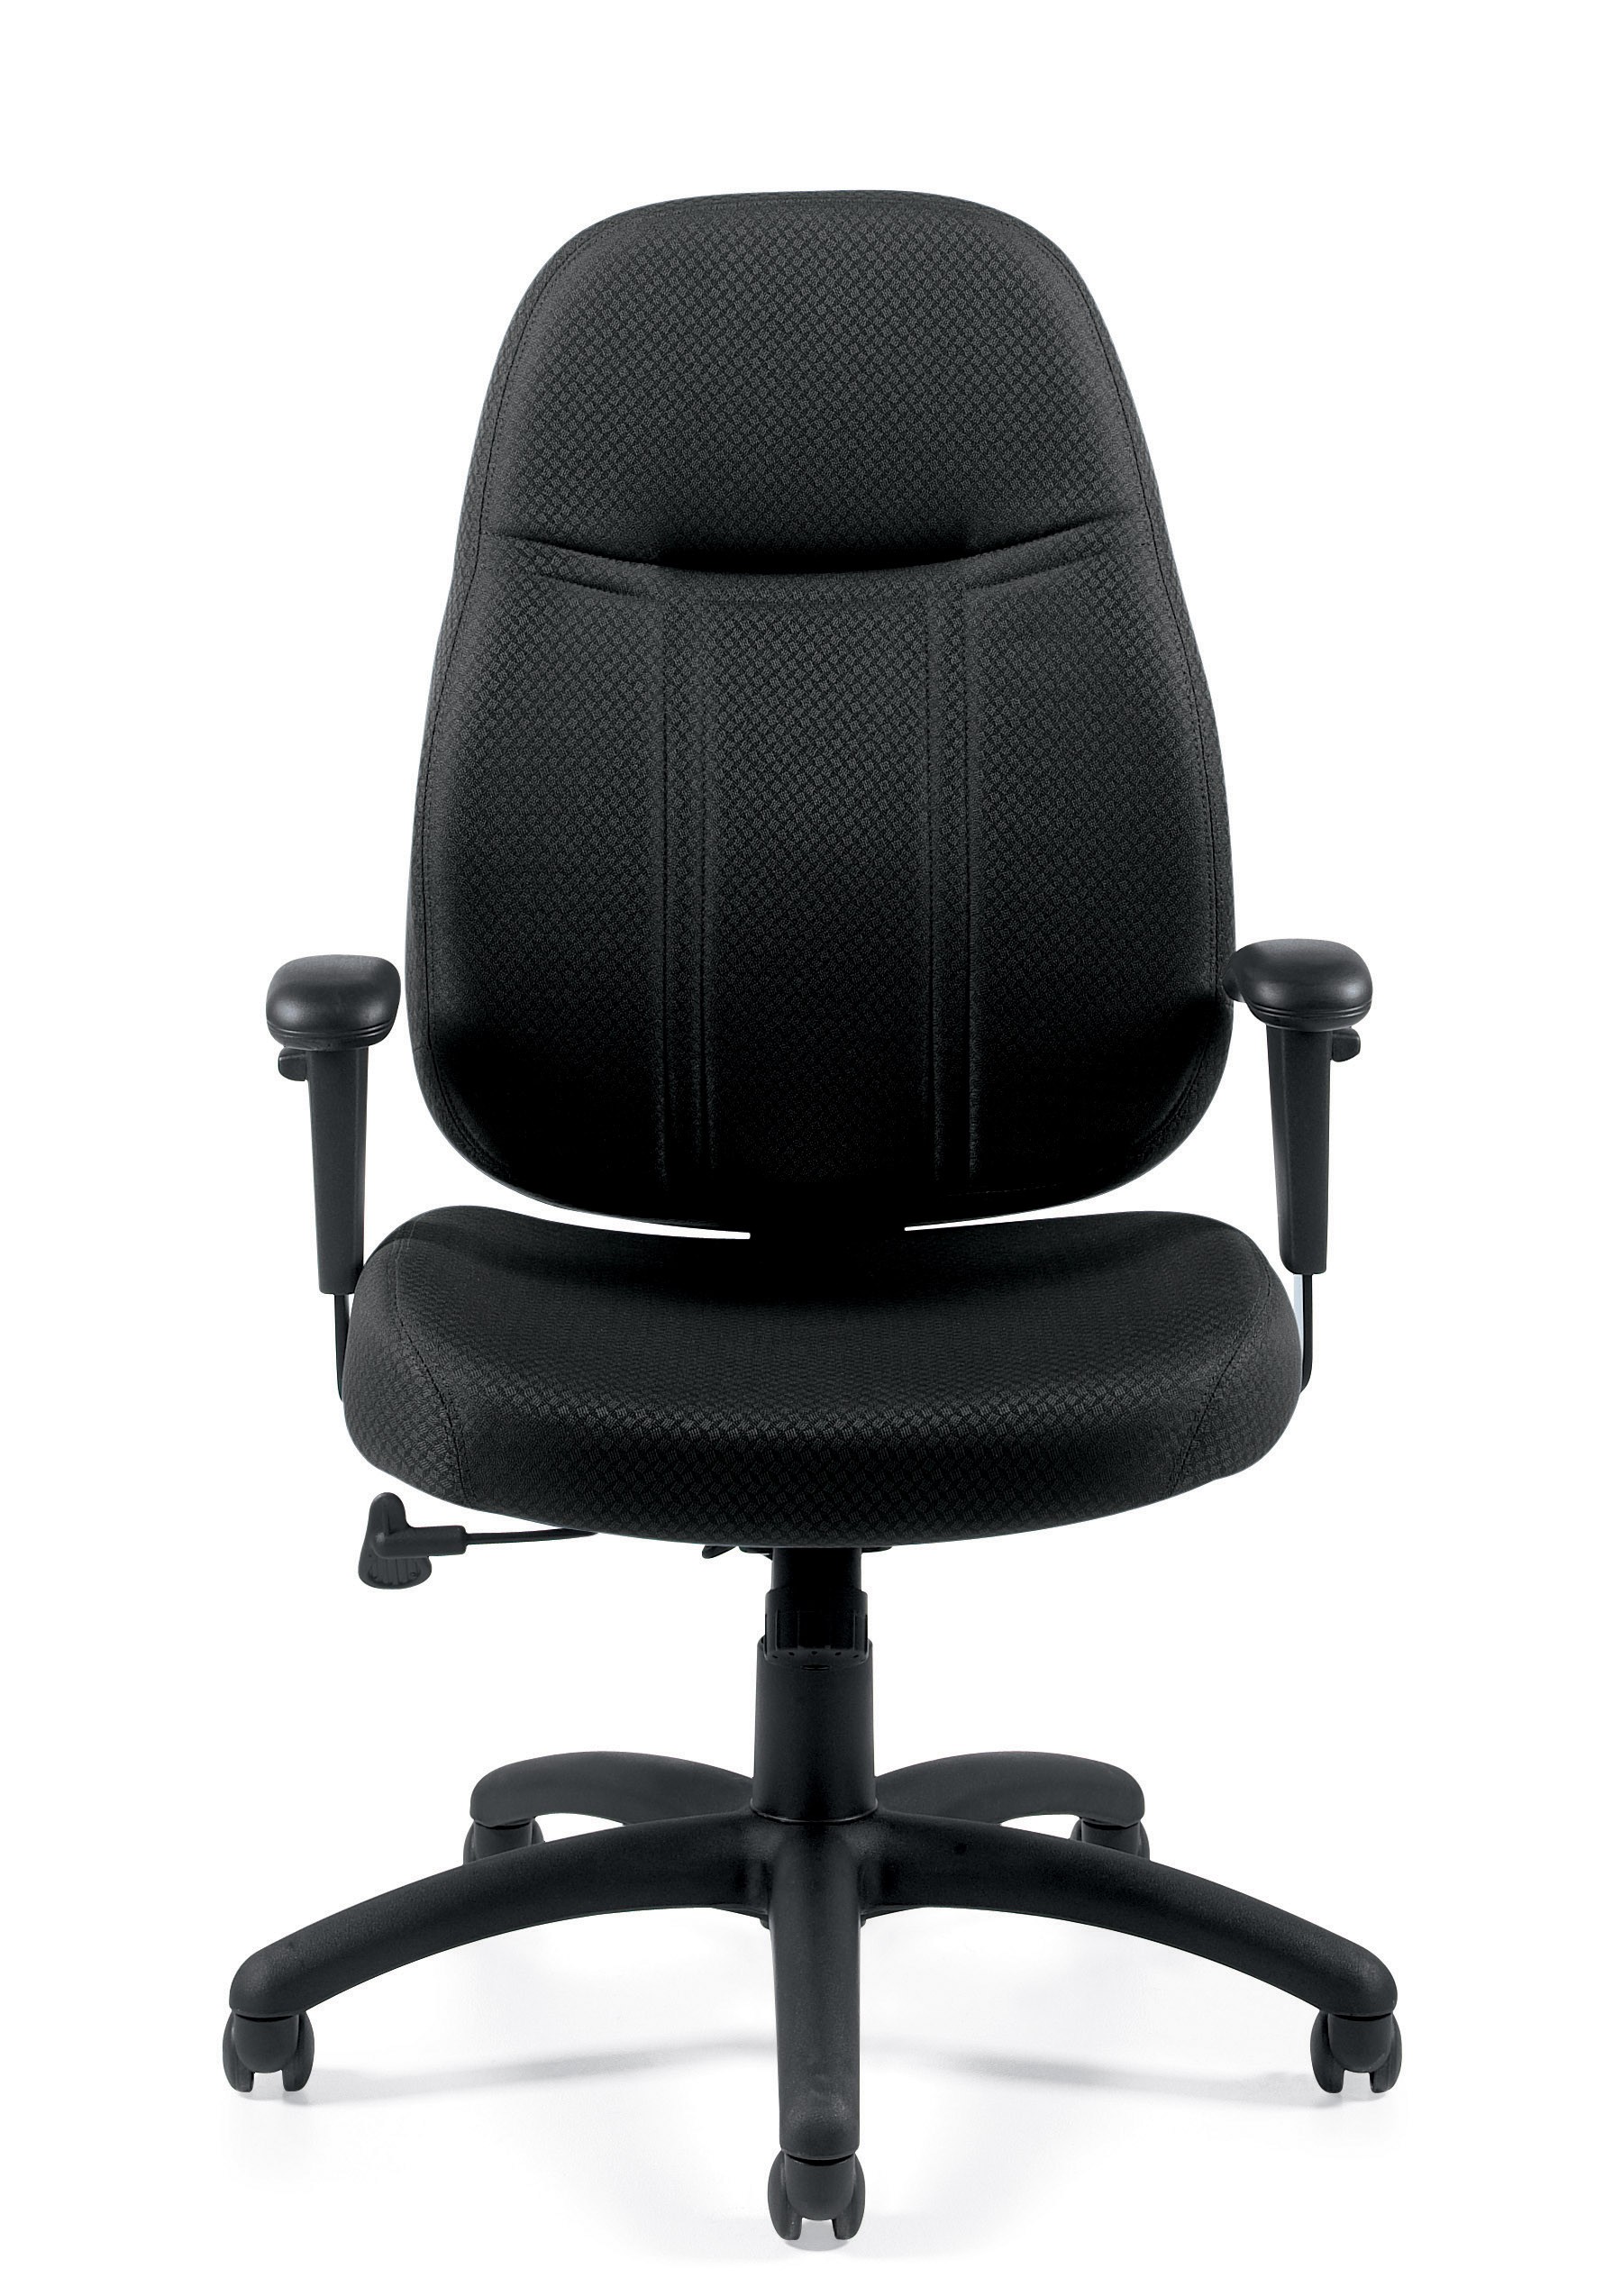 Tilter Chair with Arms